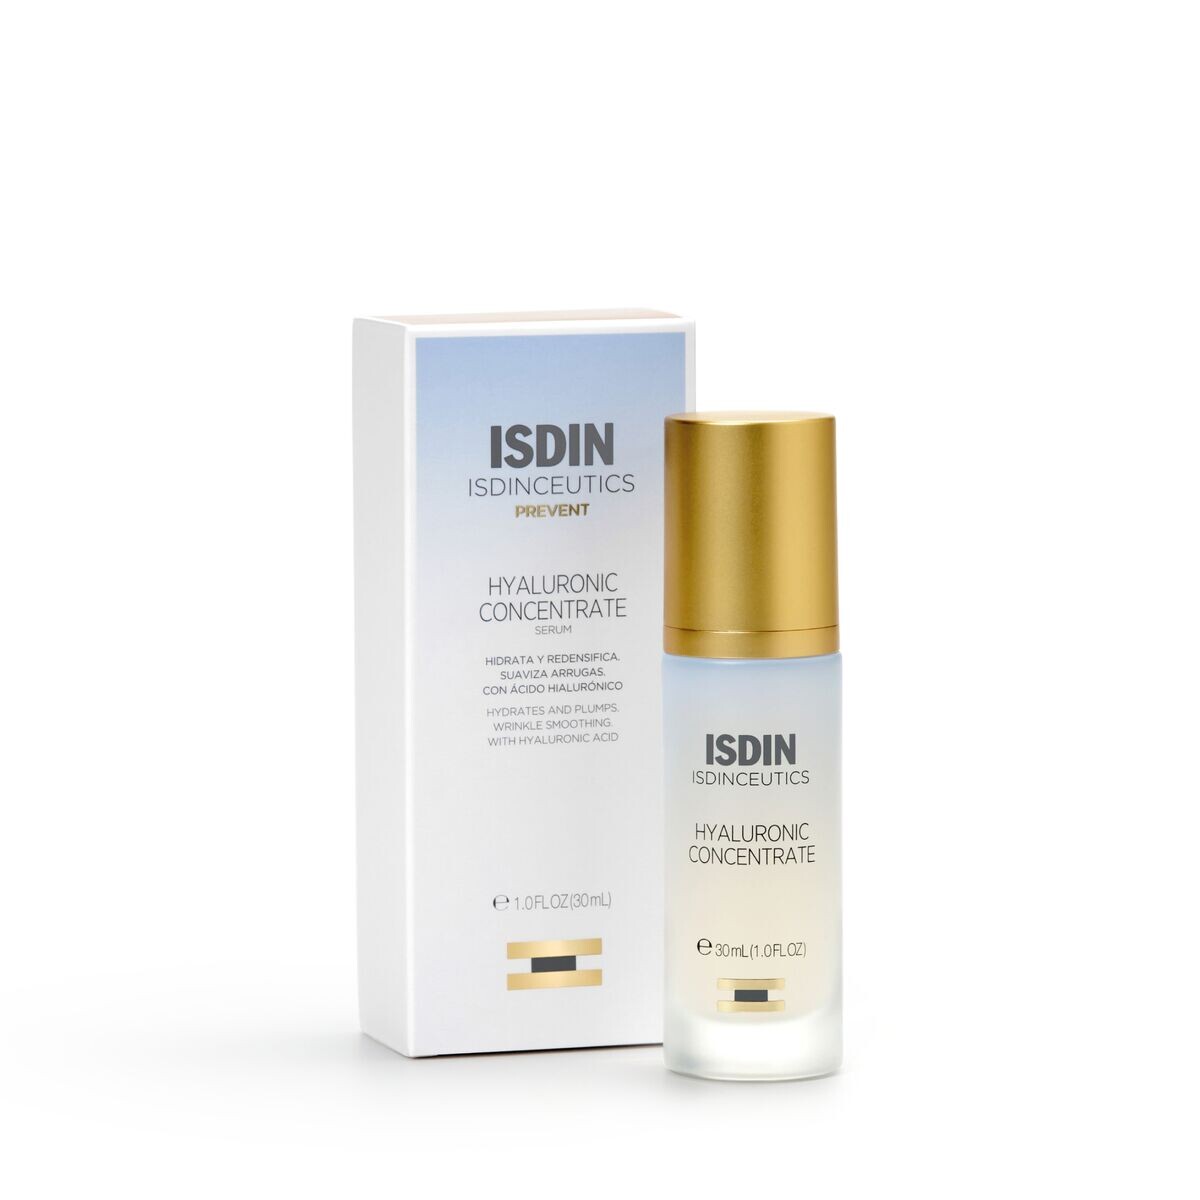 ISDIN Isdinceutics Hyaluronic Concentrate 30 ml 